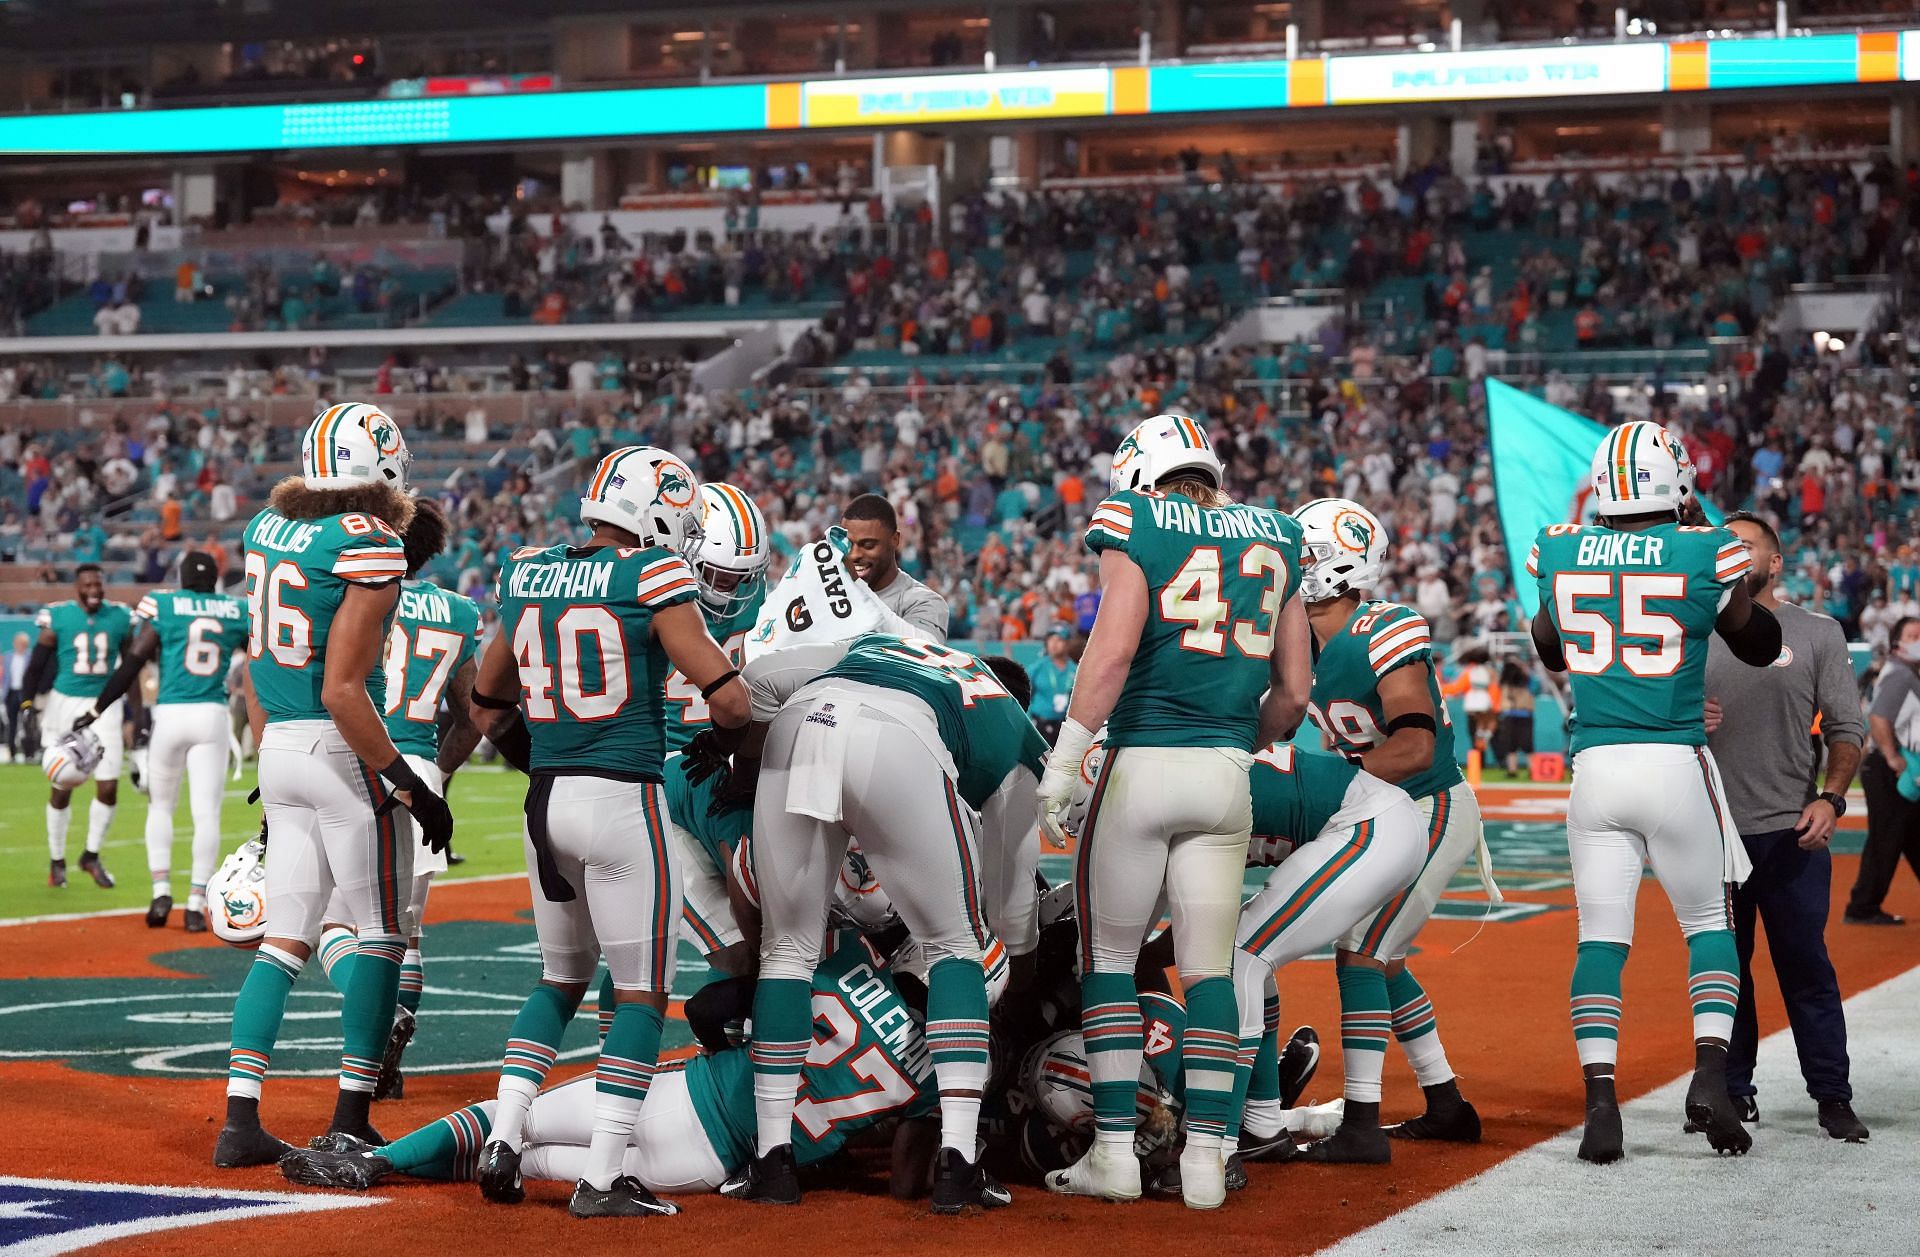 Miami Dolphins Schedule 2022 Opponents and winloss predictions